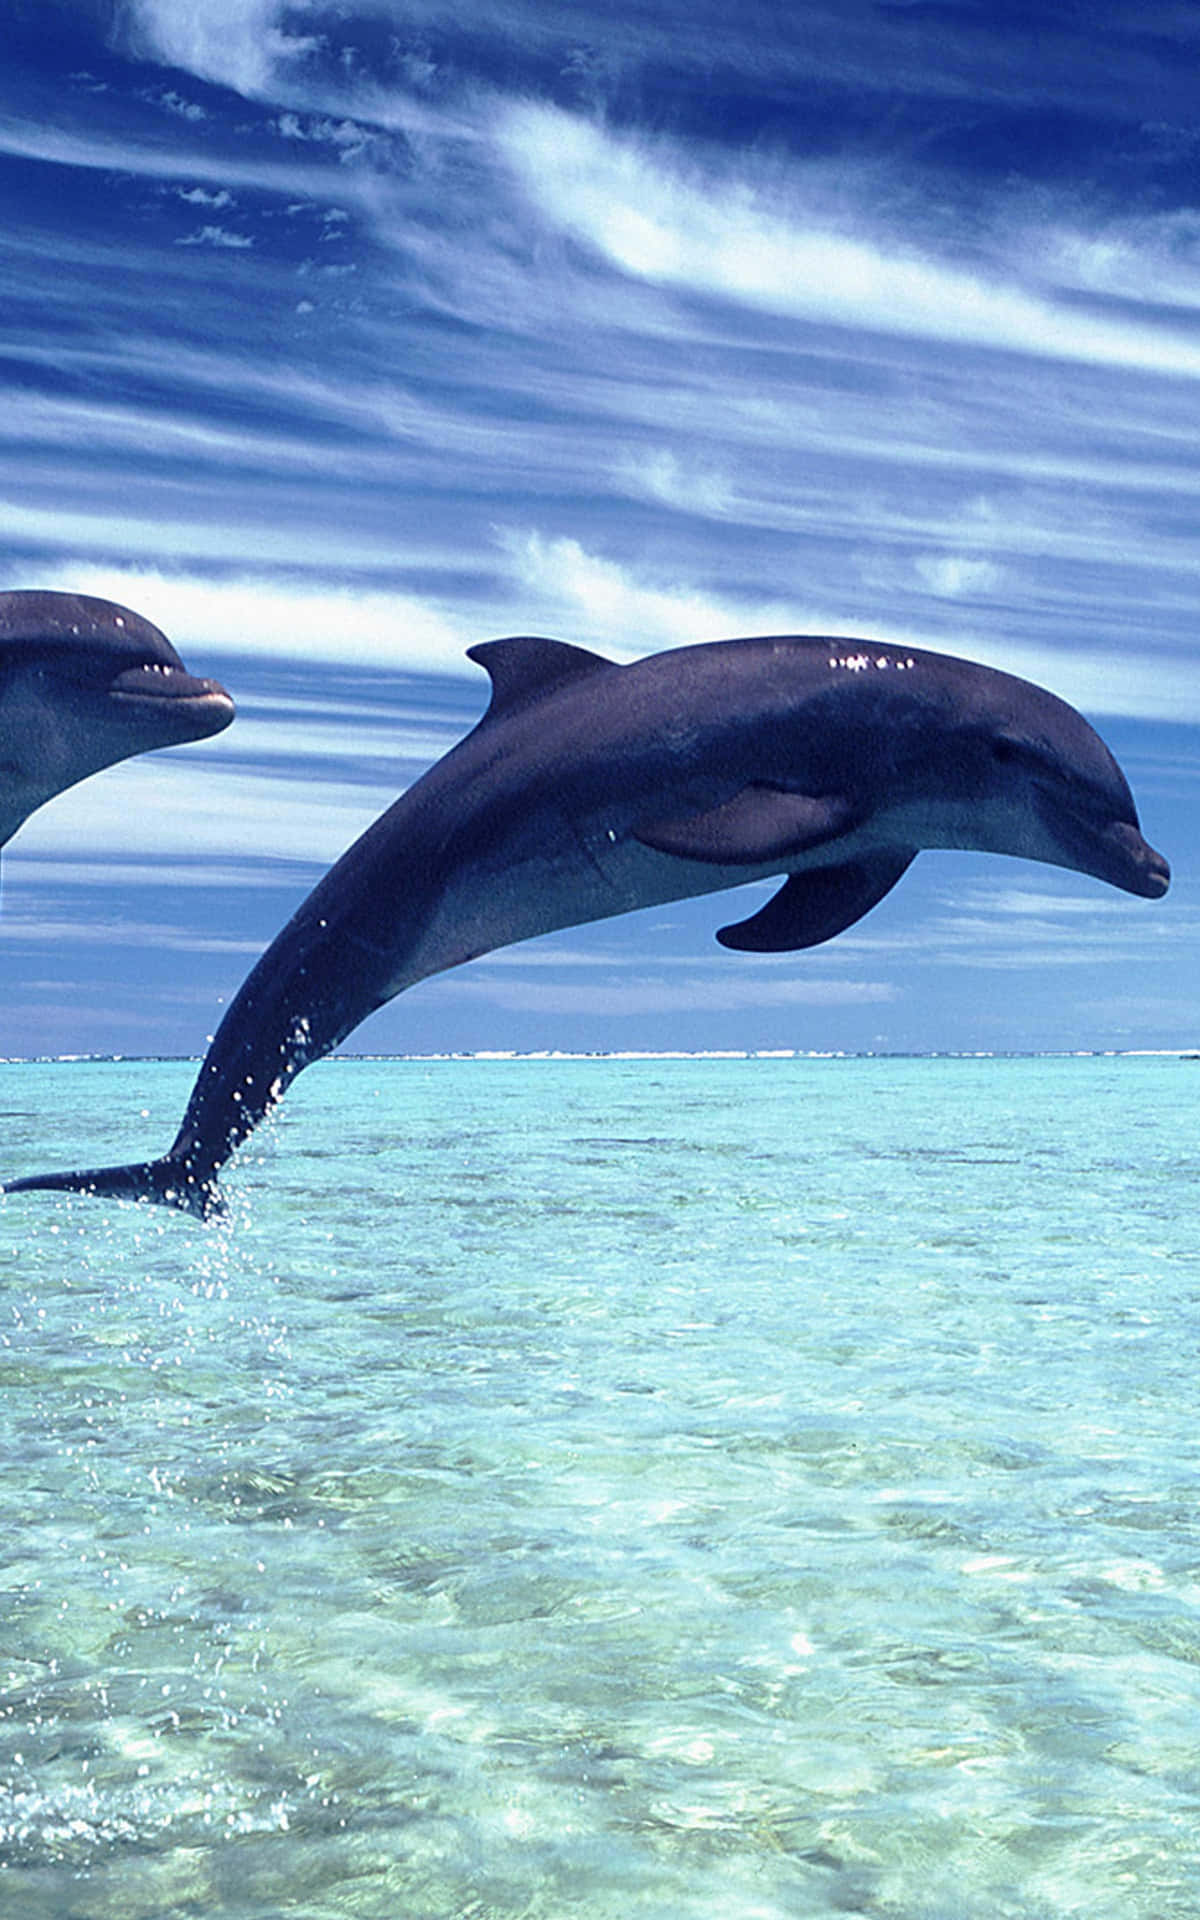 A beautiful cool dolphin bringing joy and calmness to our day Wallpaper